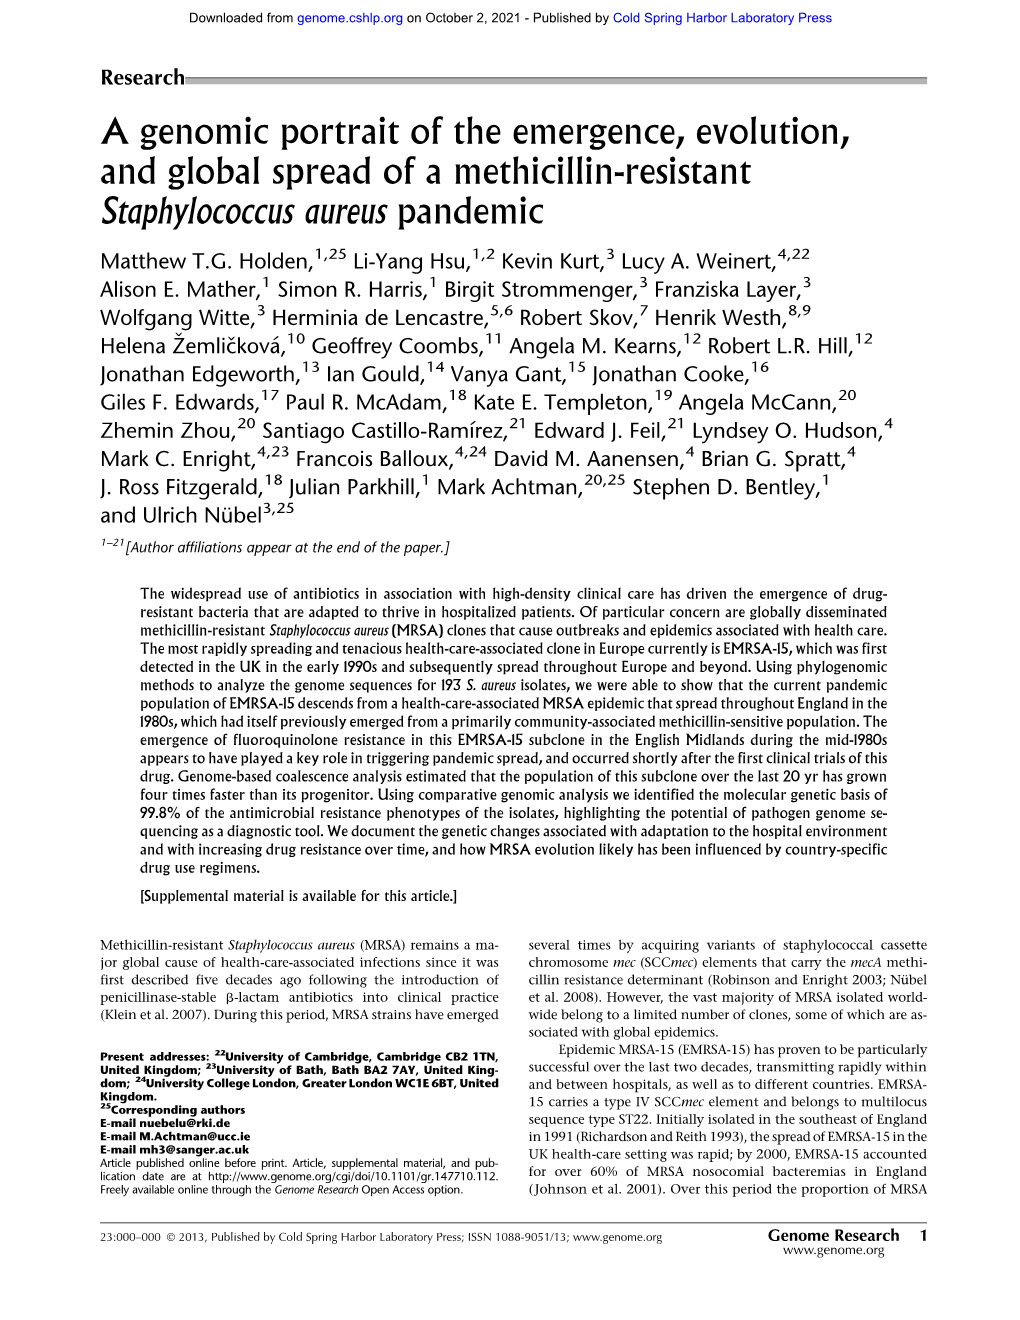 A Genomic Portrait of the Emergence, Evolution, and Global Spread of a Methicillin-Resistant Staphylococcus Aureus Pandemic